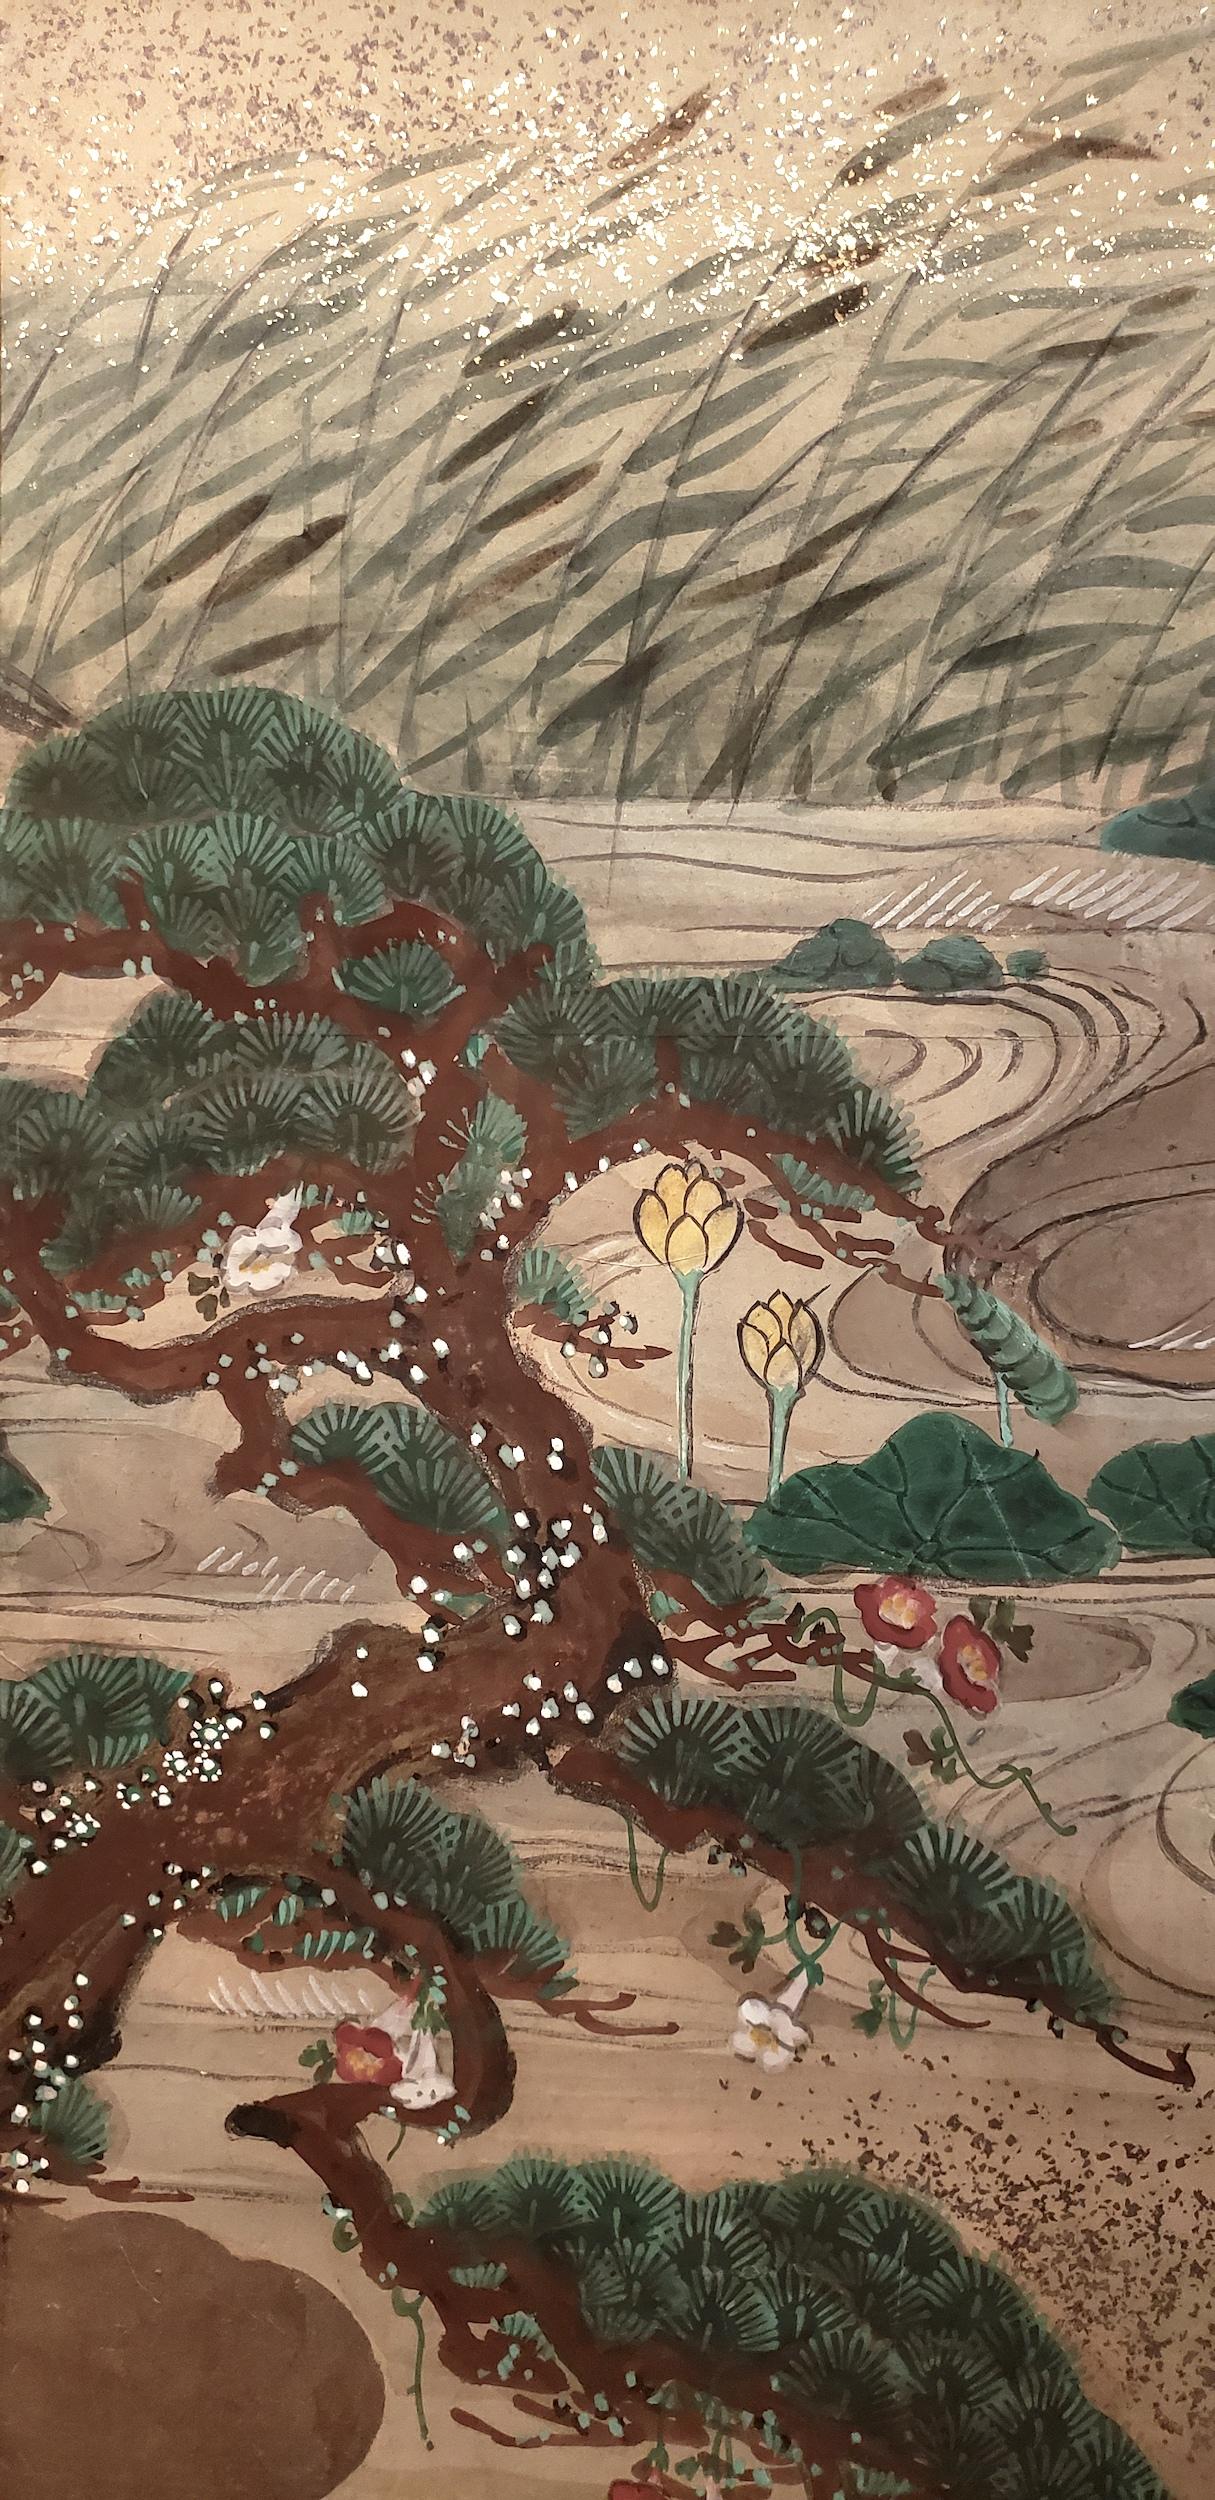 Japanese four-panel screen: Water landscape, Meiji period (1868-1912) painting of a waterfall on the left, leading to a meandering stream amongst a hilly landscape. Lotus flowers and leaves rise above the surface, water grasses bend in the breeze,